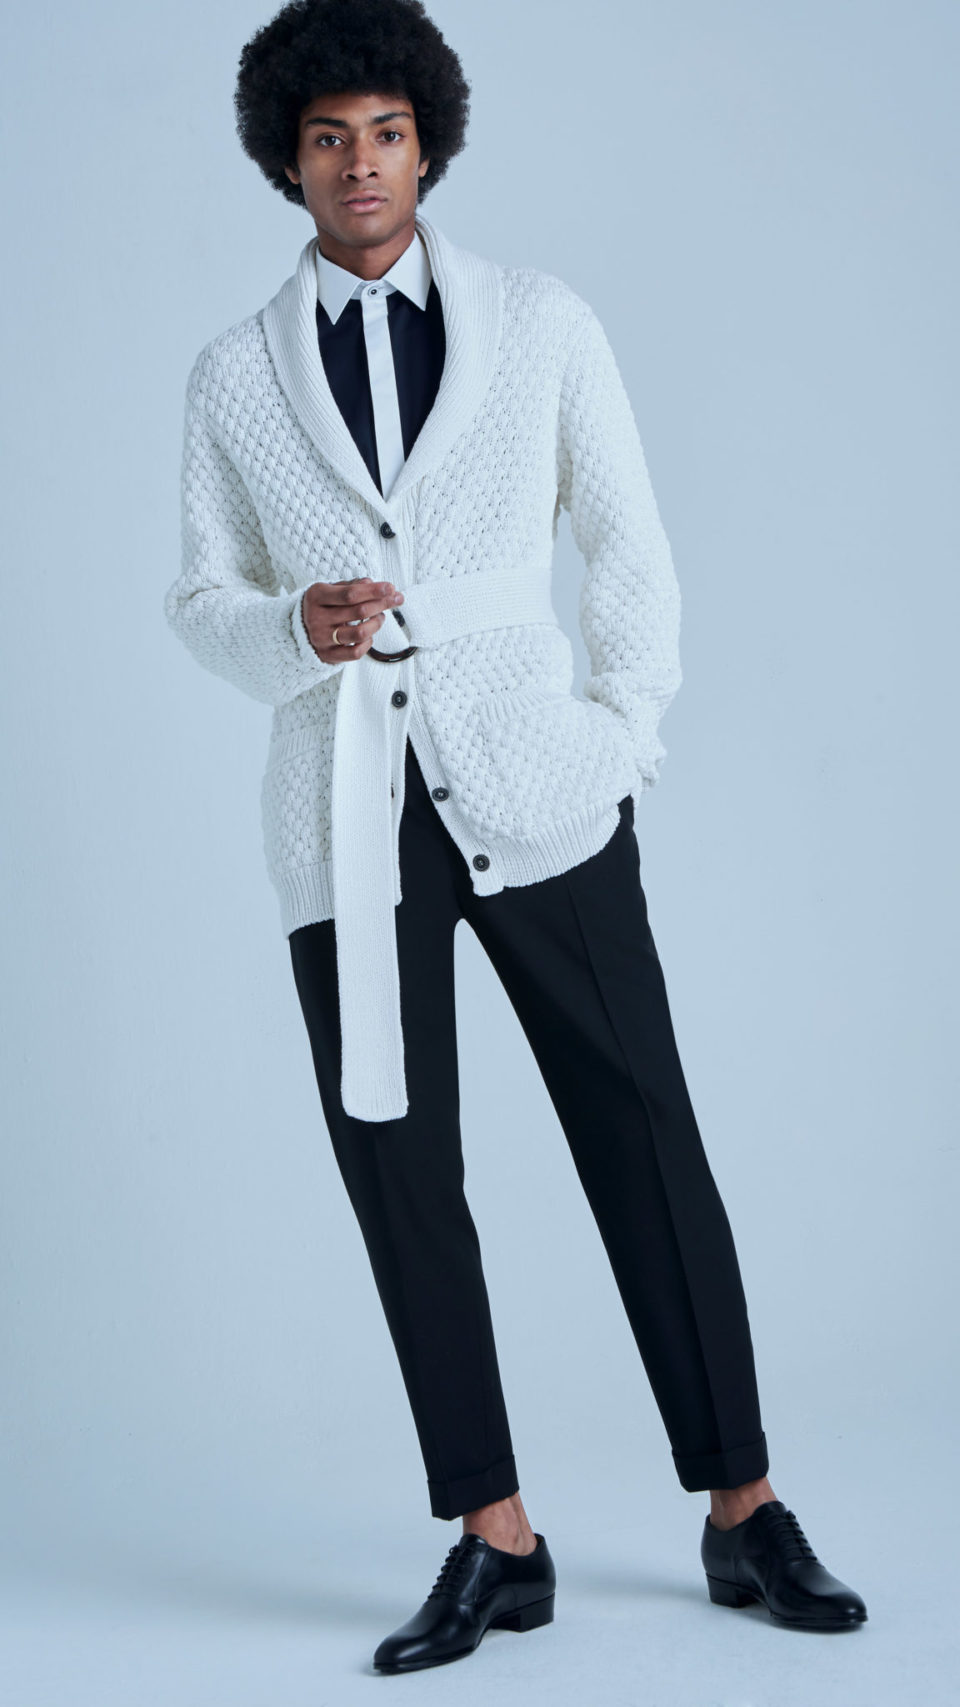 MAR by Maria Karimi cotton knit cardigan in white for men